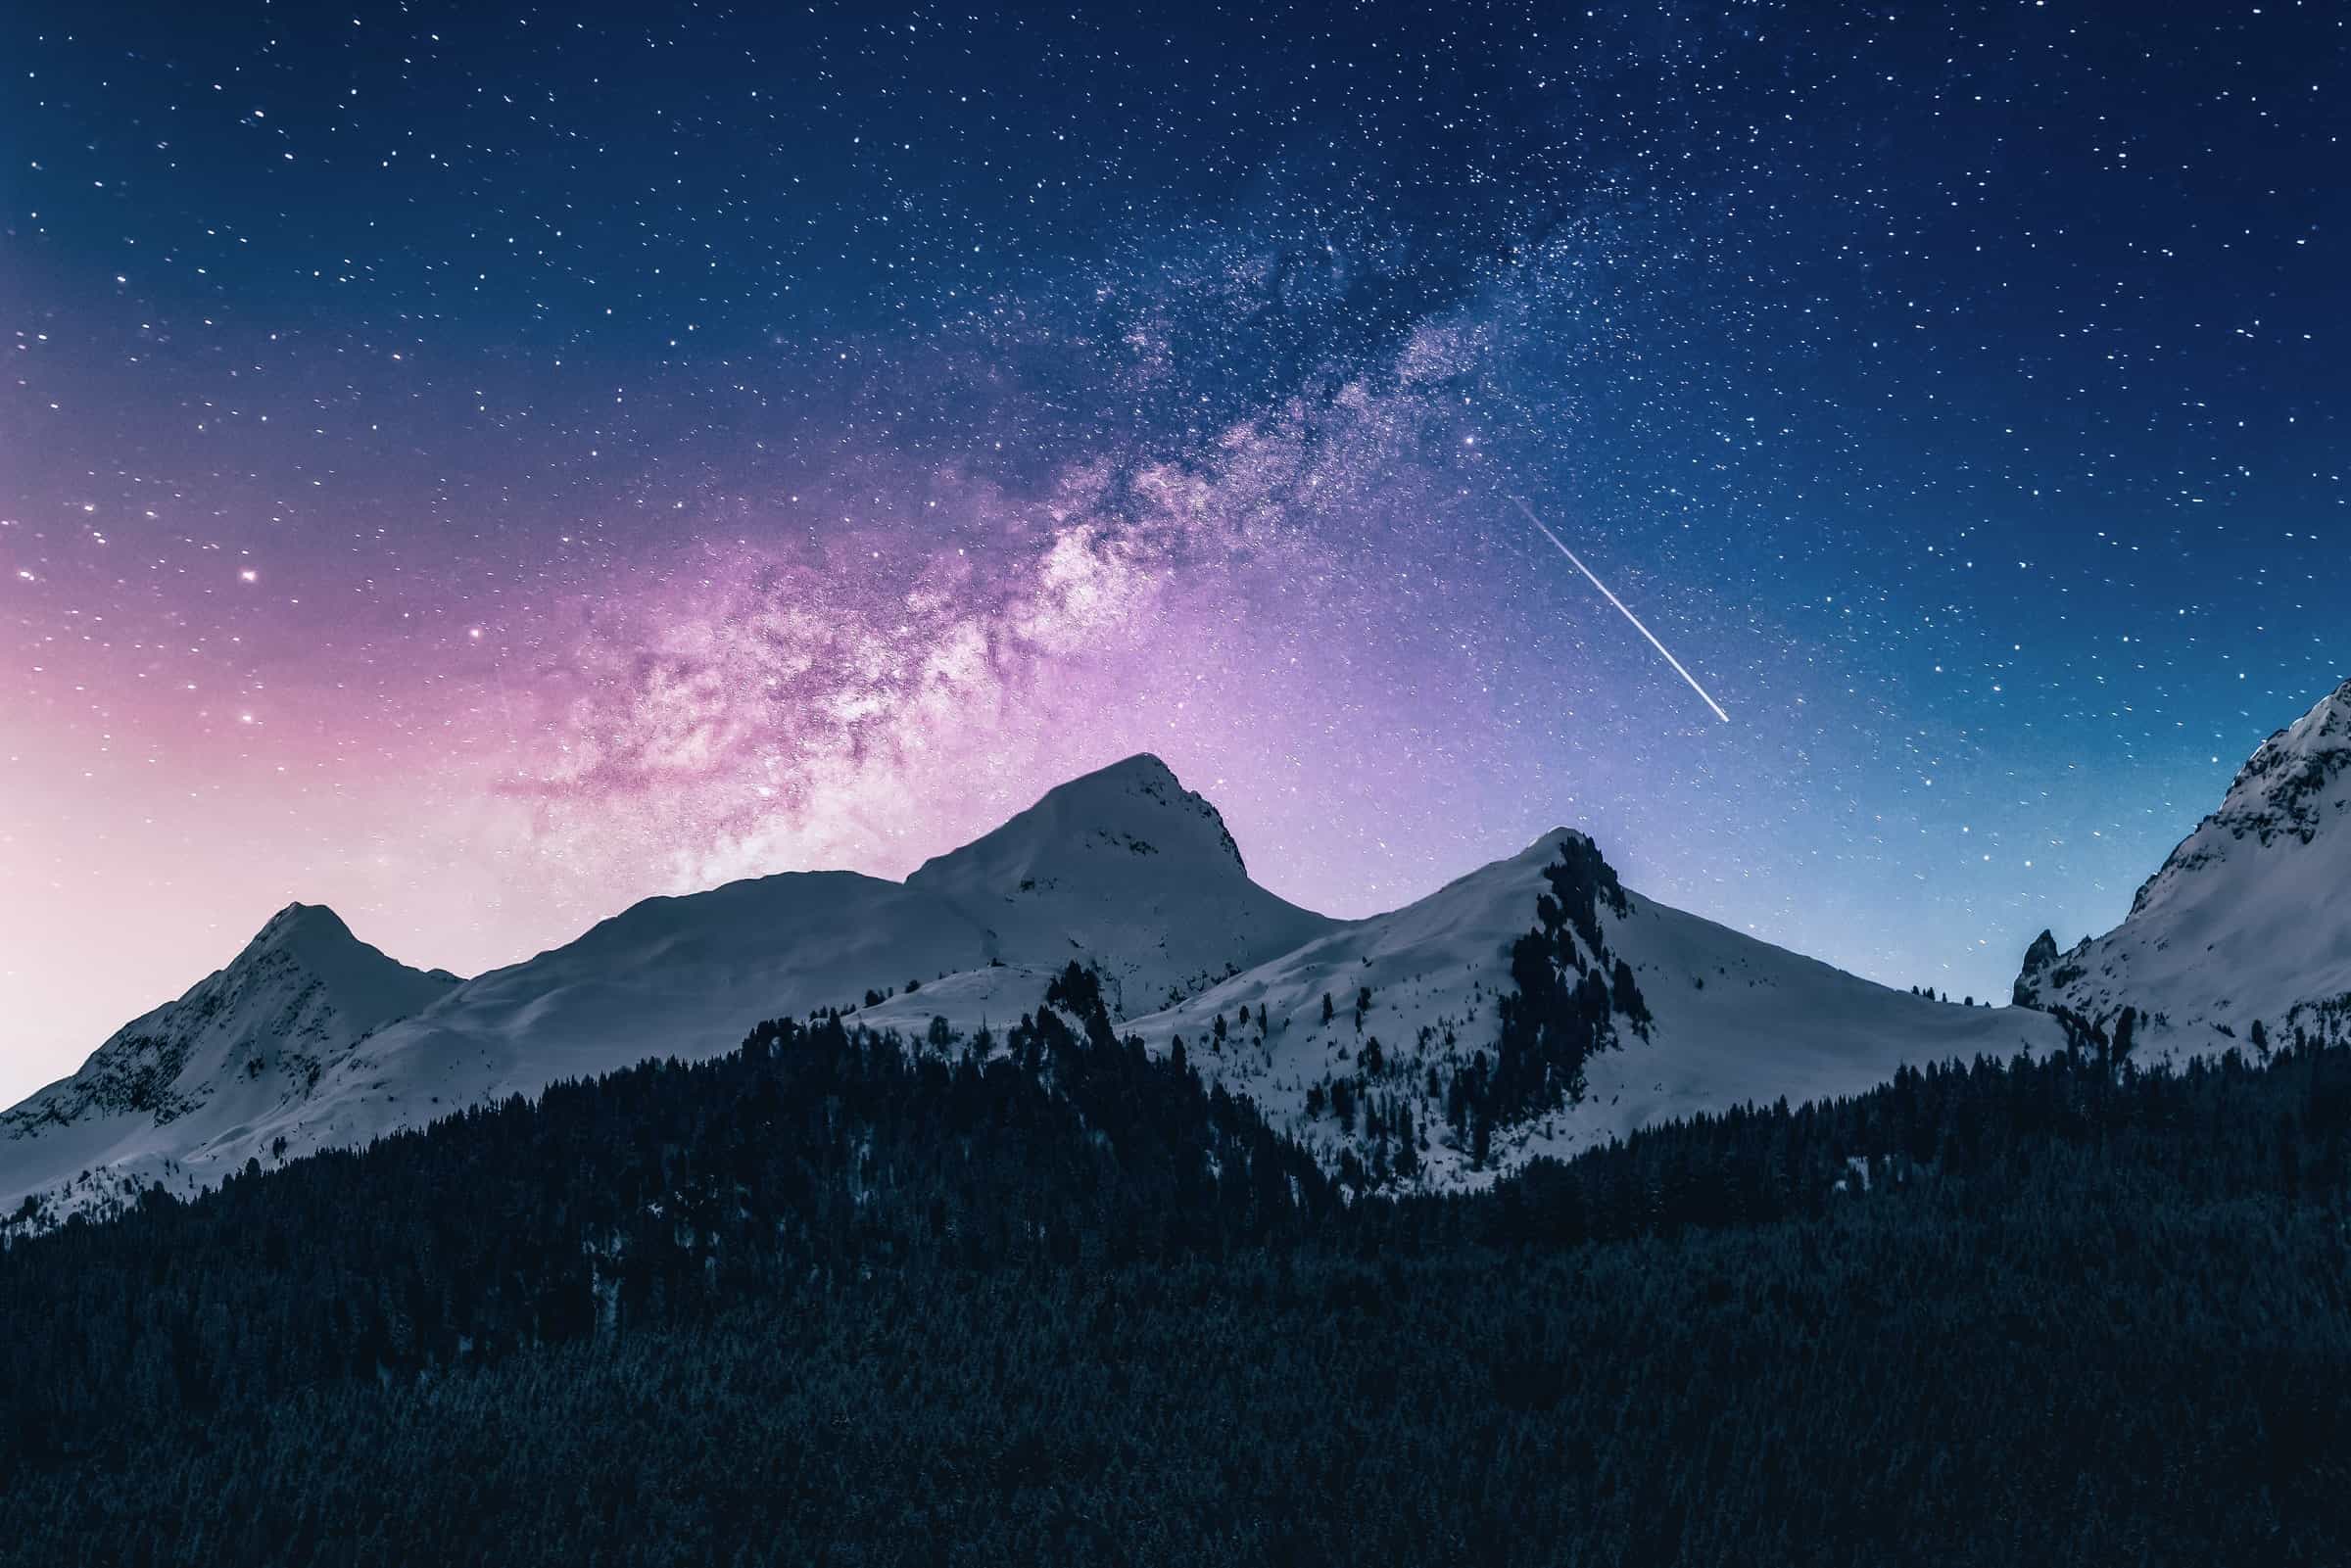 A starry night sky with a vivid milky way galaxy arching over snow-capped mountains, accompanied by the ethereal glow of astronomical twilight.